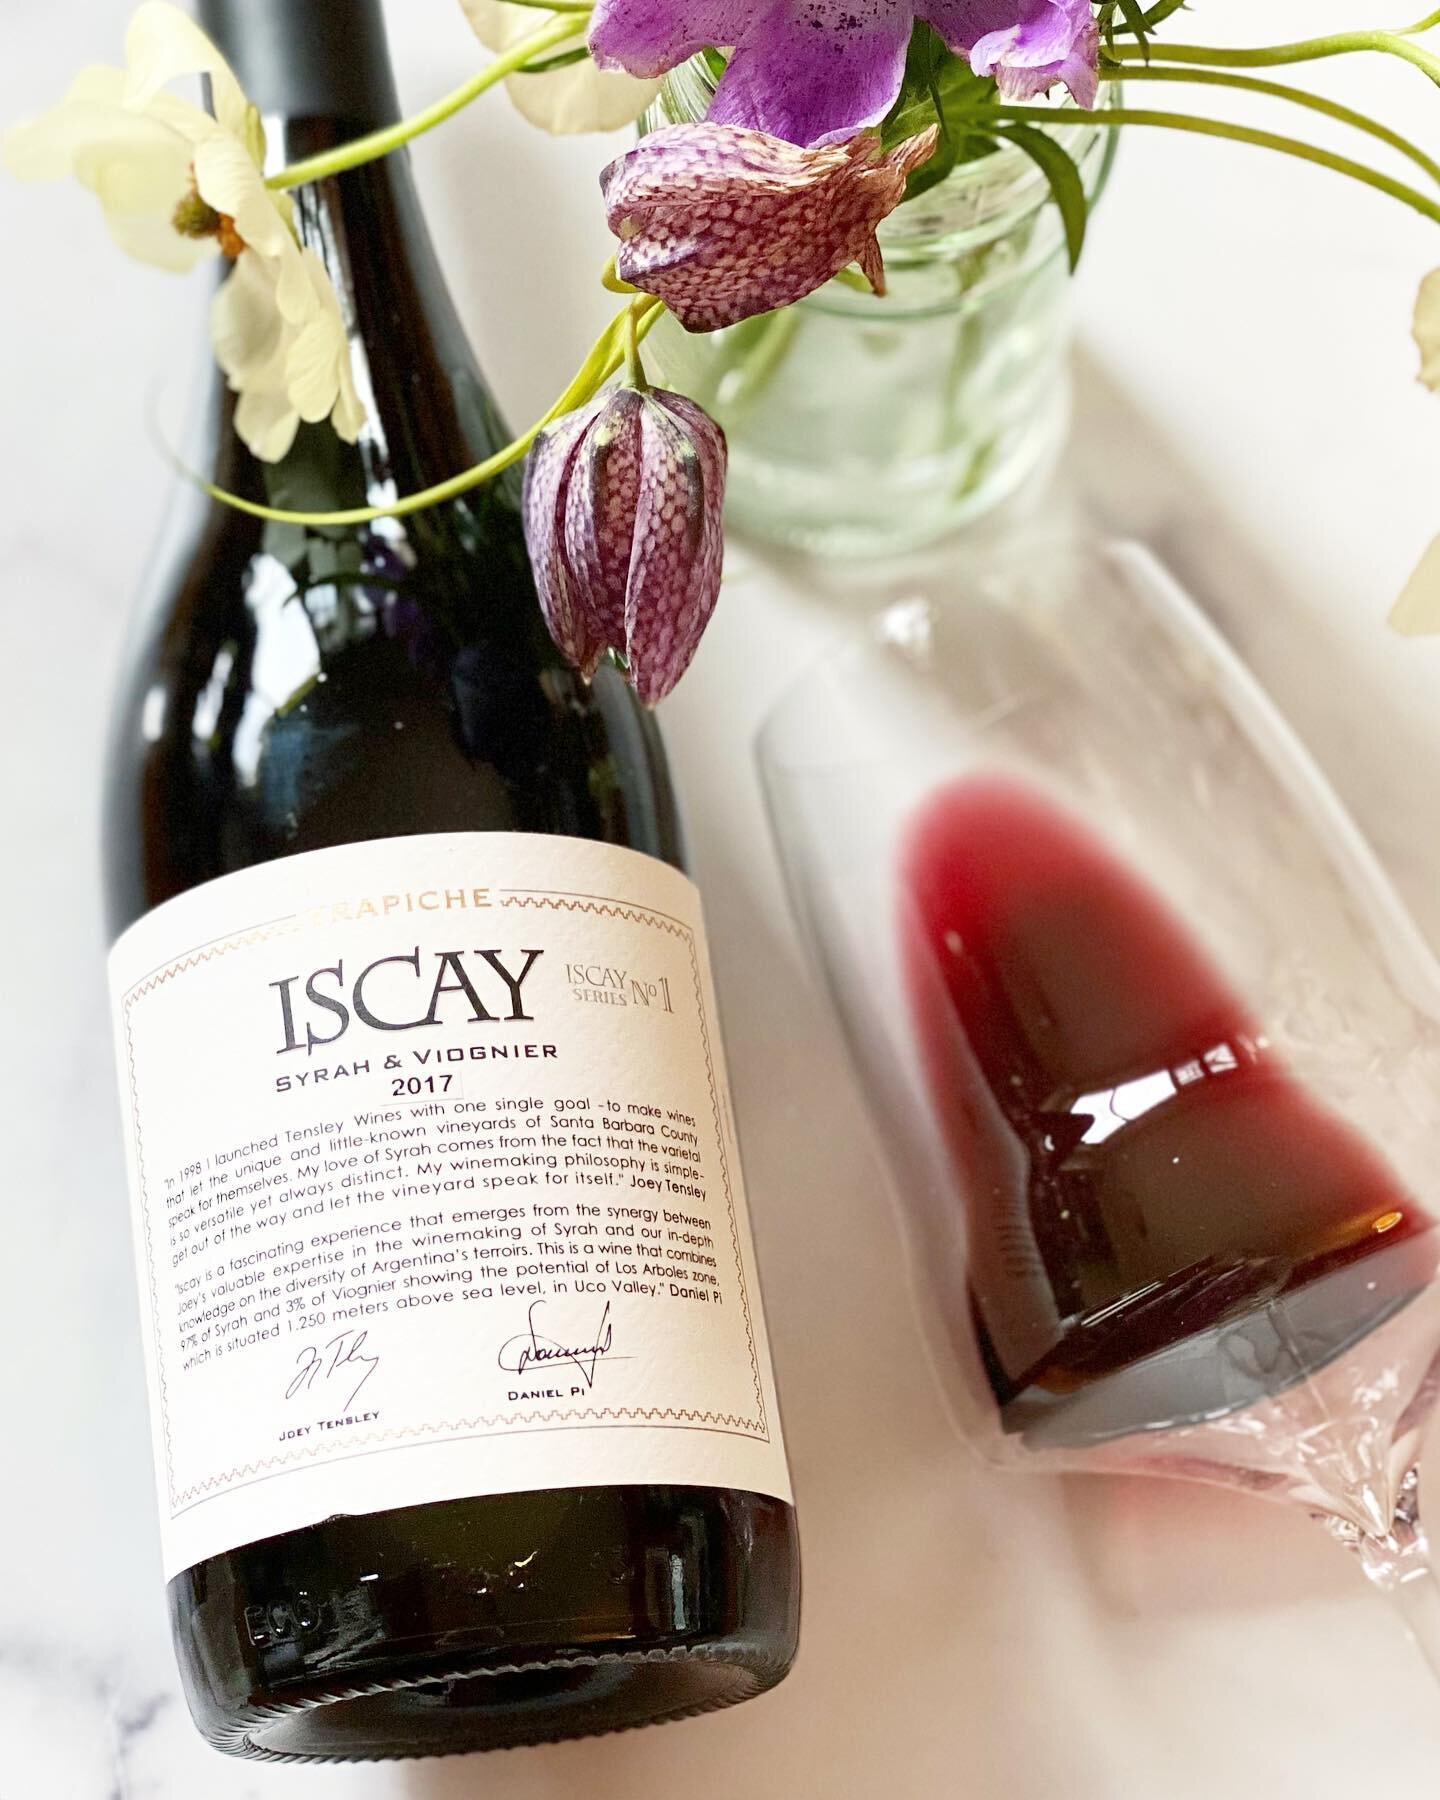 Iscay Syrah &amp; Viognier is a Trapiche project honoring two grapes, Syrah and Viognier, and the friendship between two renowned winemakers, Joe Tensely with @tensleywines in California, and Daniel Pi, the Chief Winemaker of&nbsp;Trapiche in Argenti